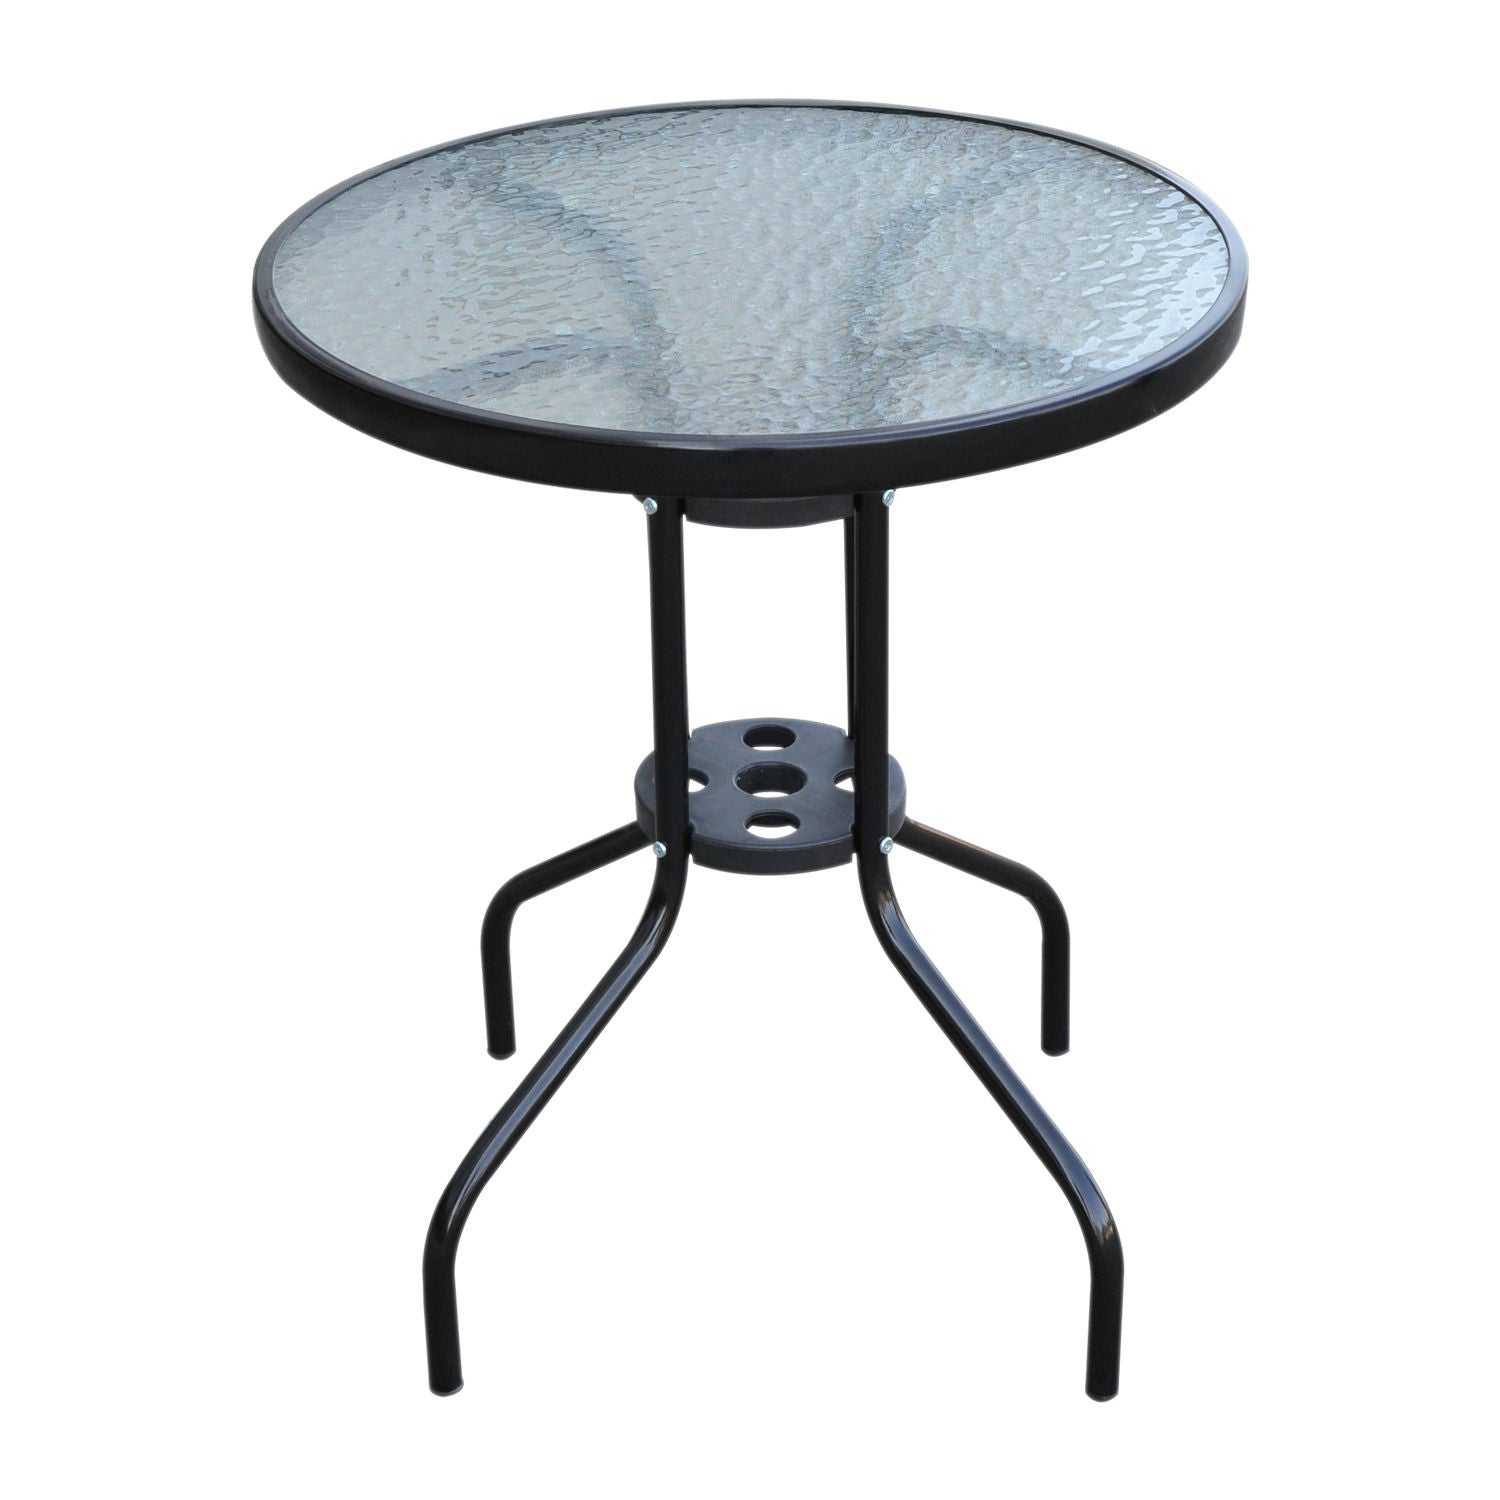 Nancy's Upland Garden Table - Glass Table - Bistro Table - Balcony Table - Black - Metal - Safety Glass - 60 x 70 cm